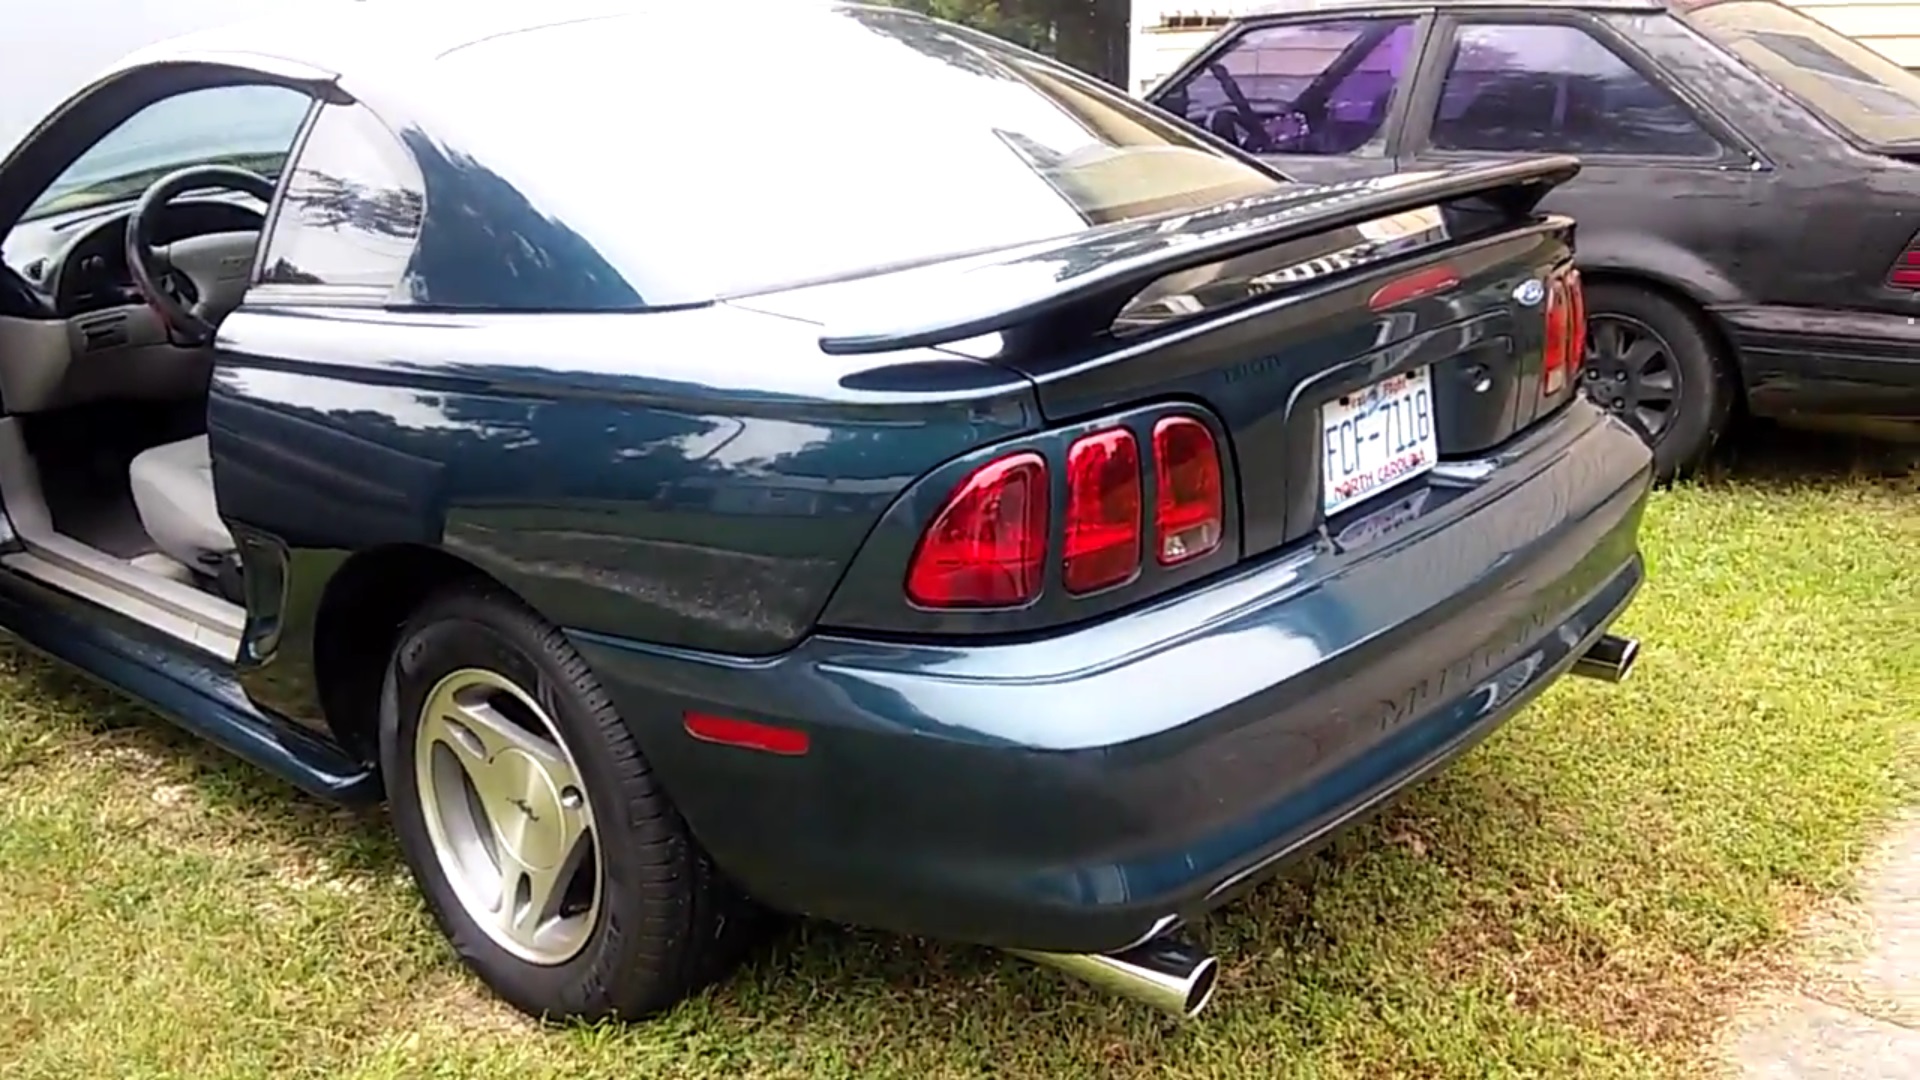 Video: 1996 Ford Mustang V6 Exhaust Sound